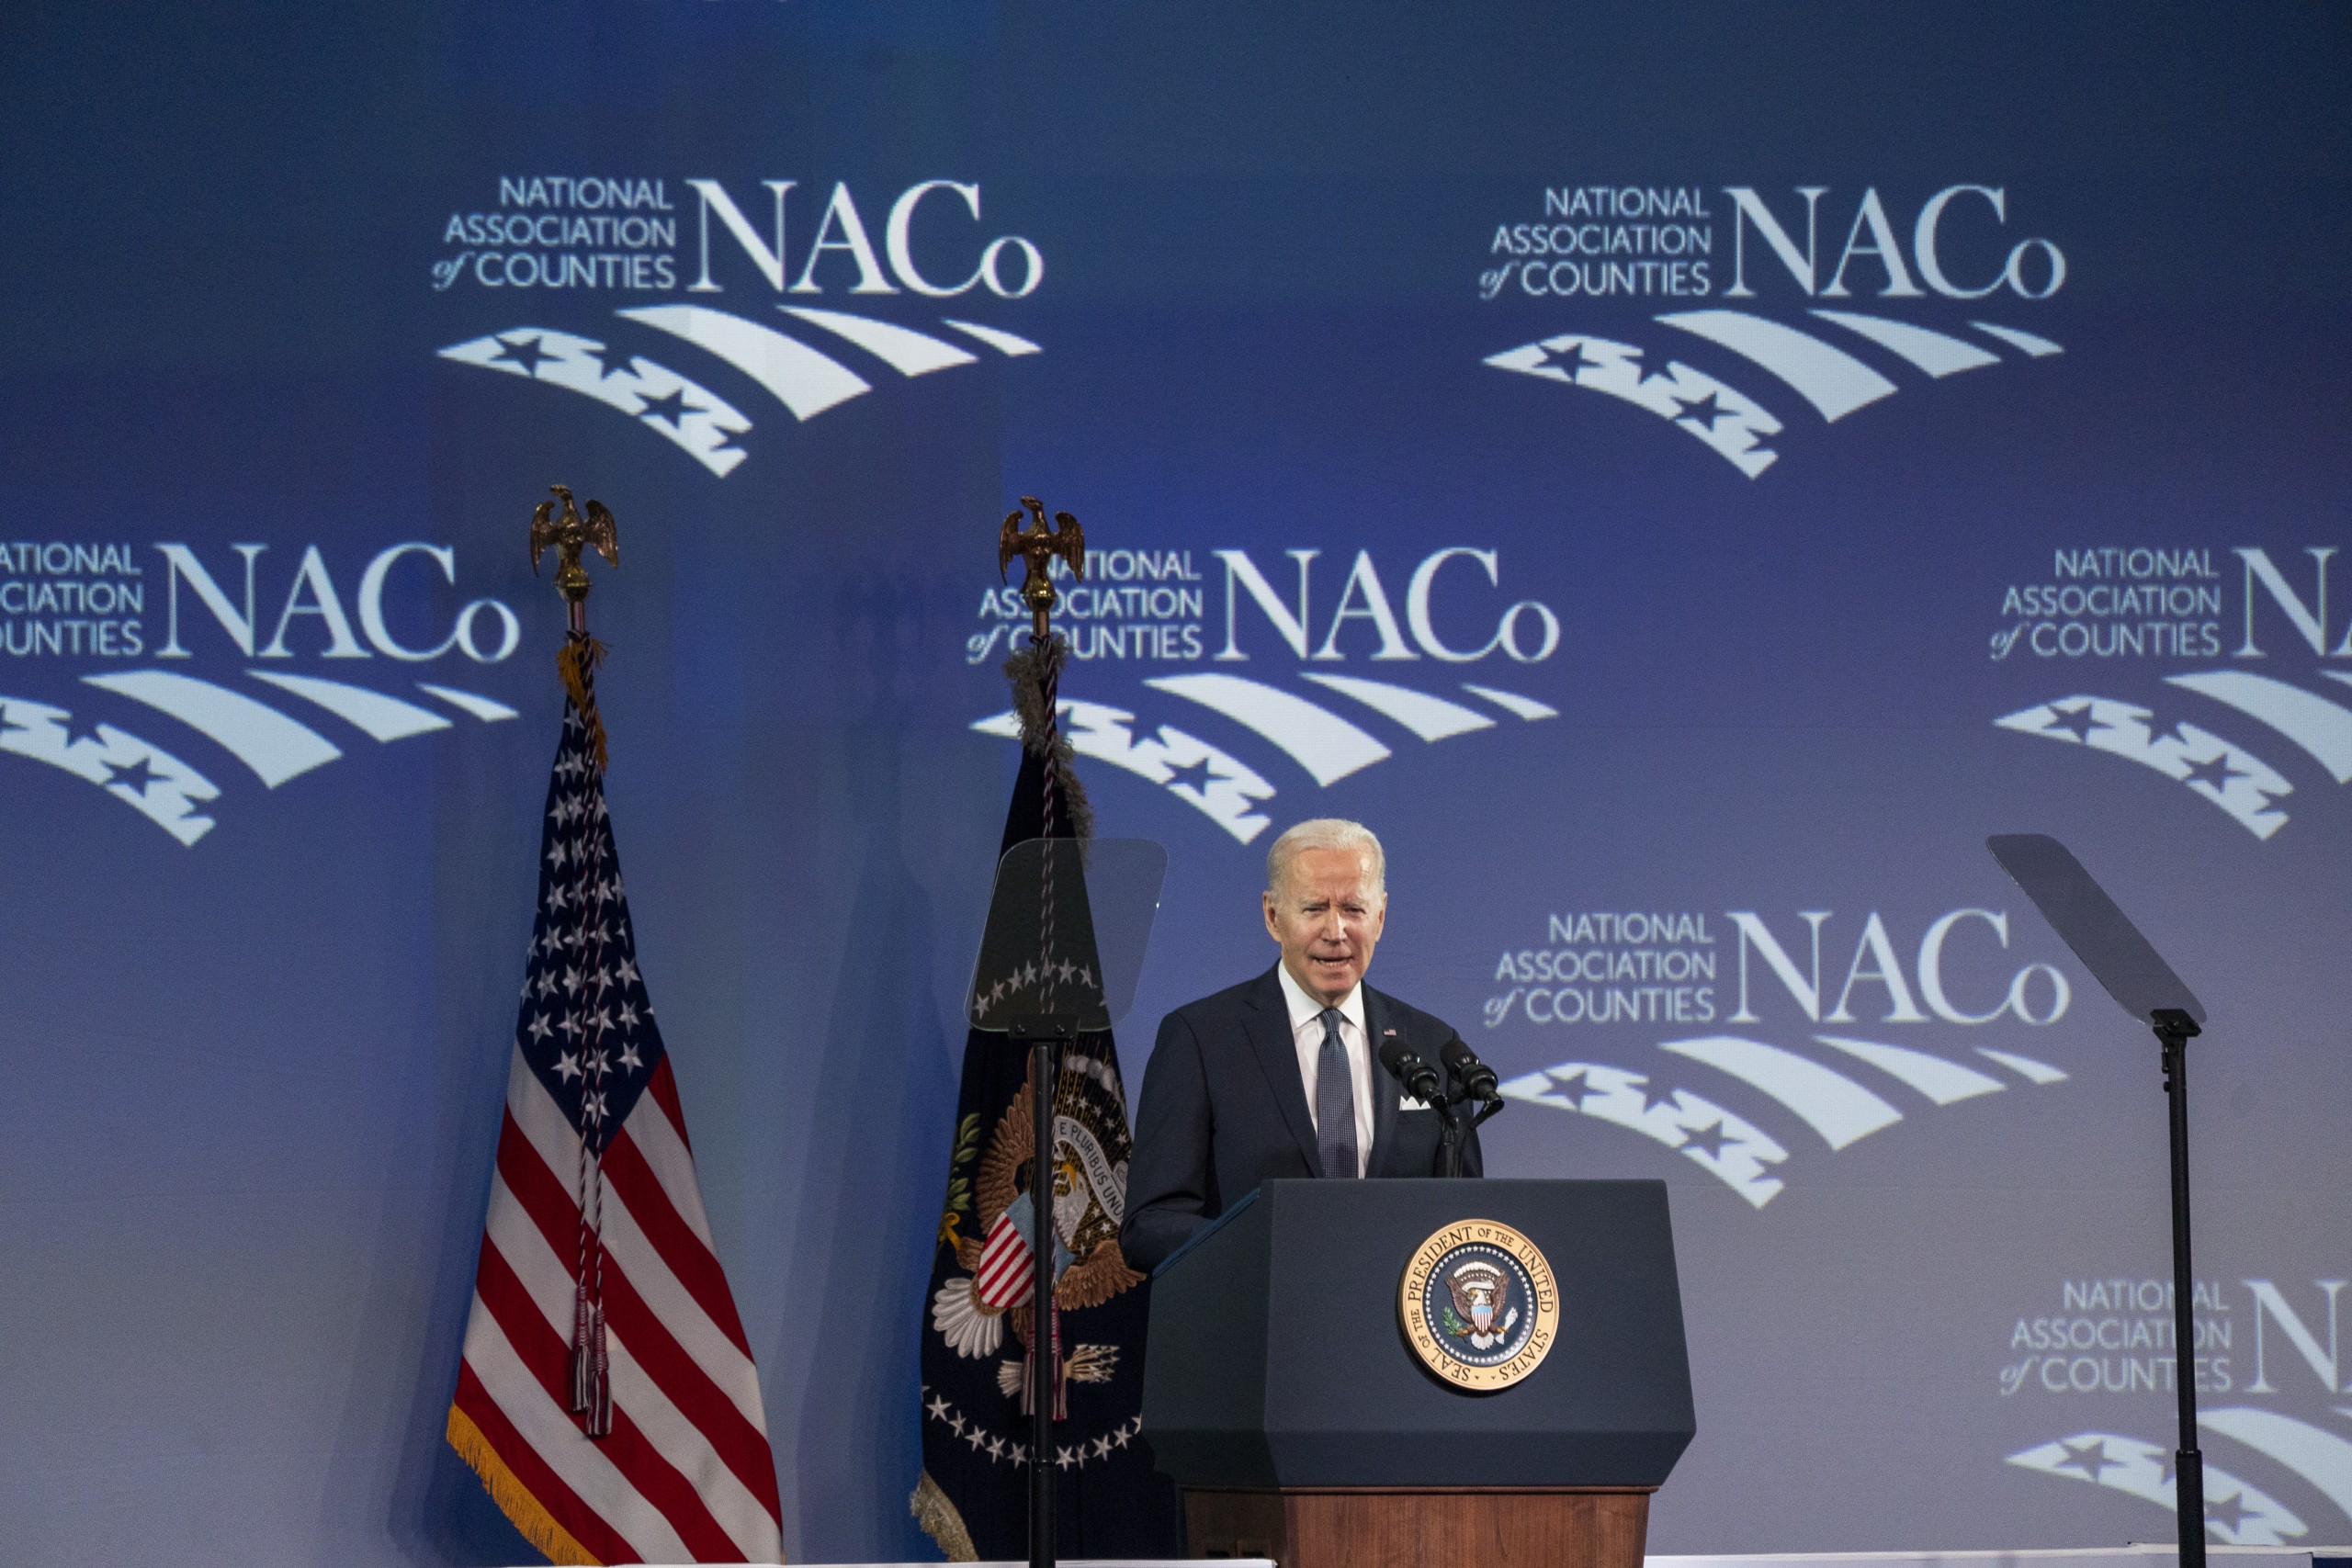 epa09760058 US President Joe Biden delivers remarks to bipartisan county officials from around the country at the National Association of Counties 2022 Legislative Conference in Washington, DC, USA, 15 February 2022.  EPA/SHAWN THEW